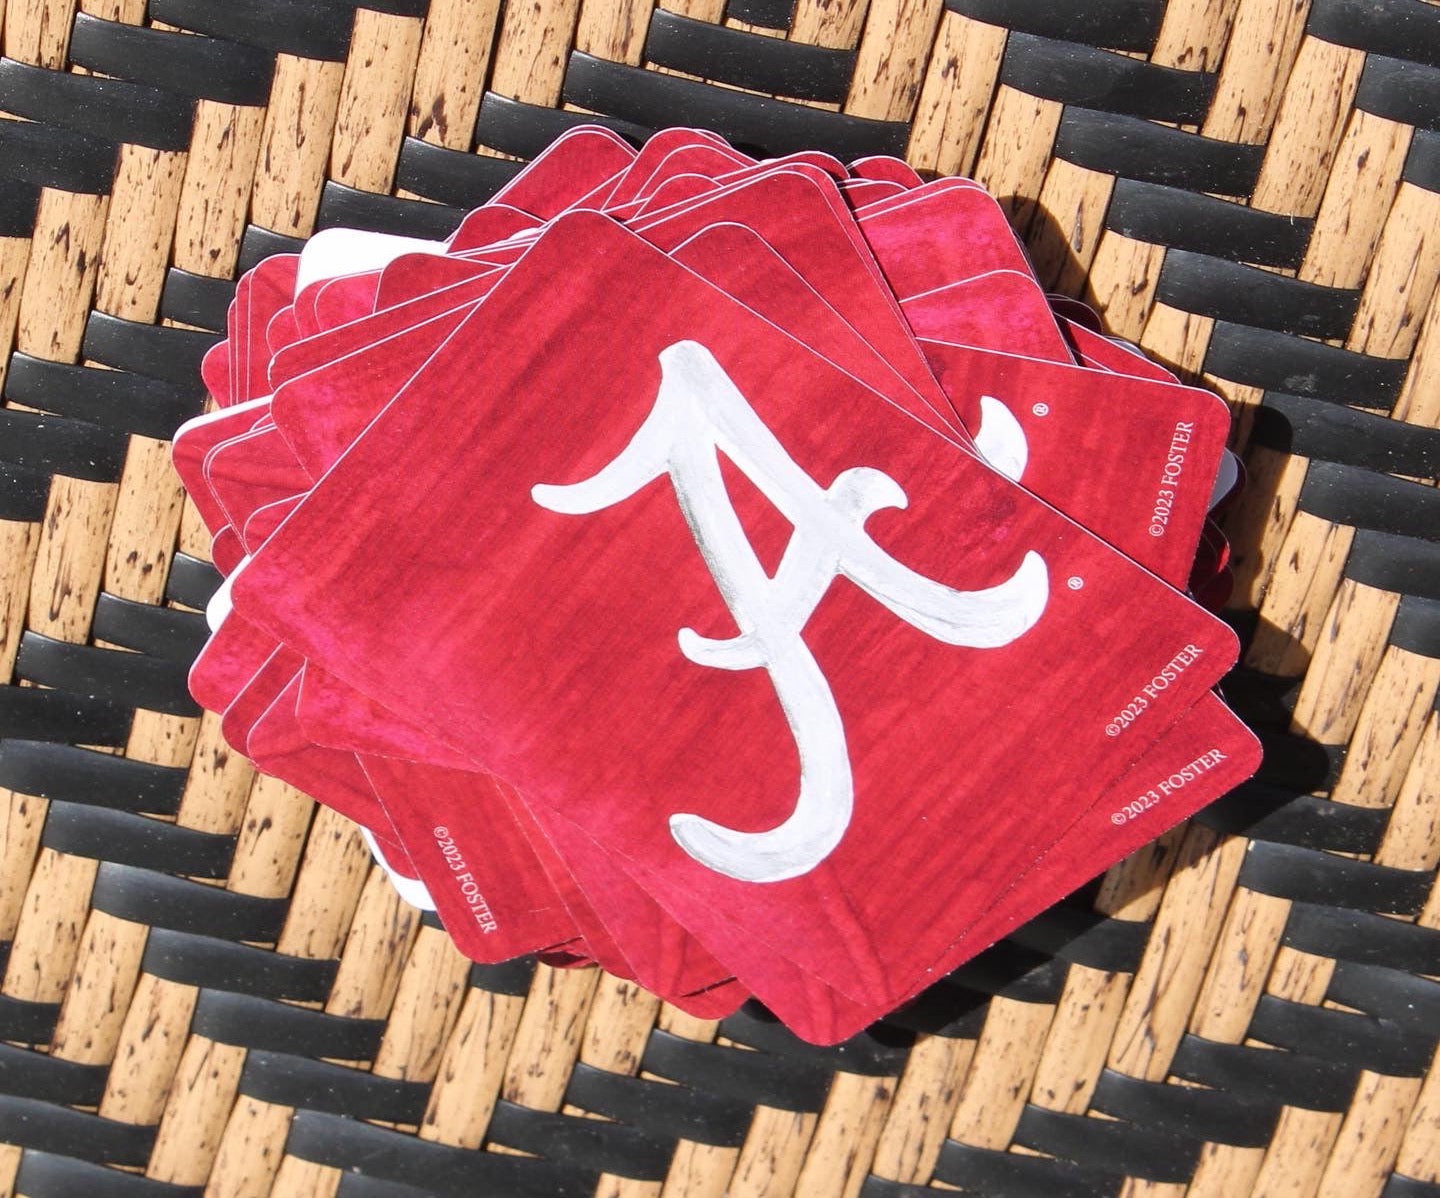 Alabama playing cards by FOSTER